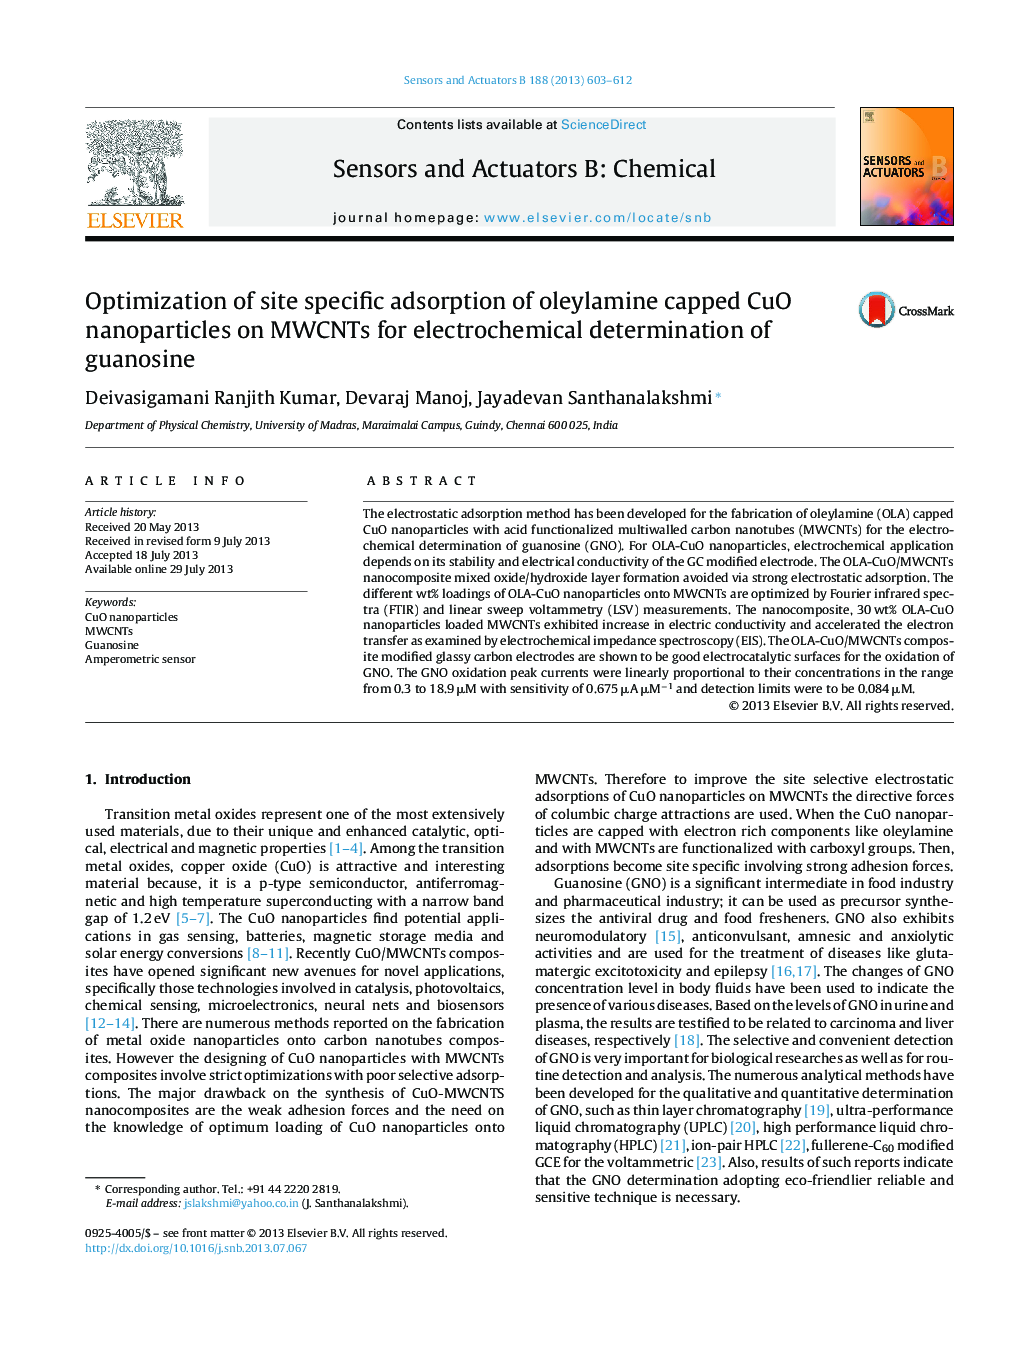 Optimization of site specific adsorption of oleylamine capped CuO nanoparticles on MWCNTs for electrochemical determination of guanosine